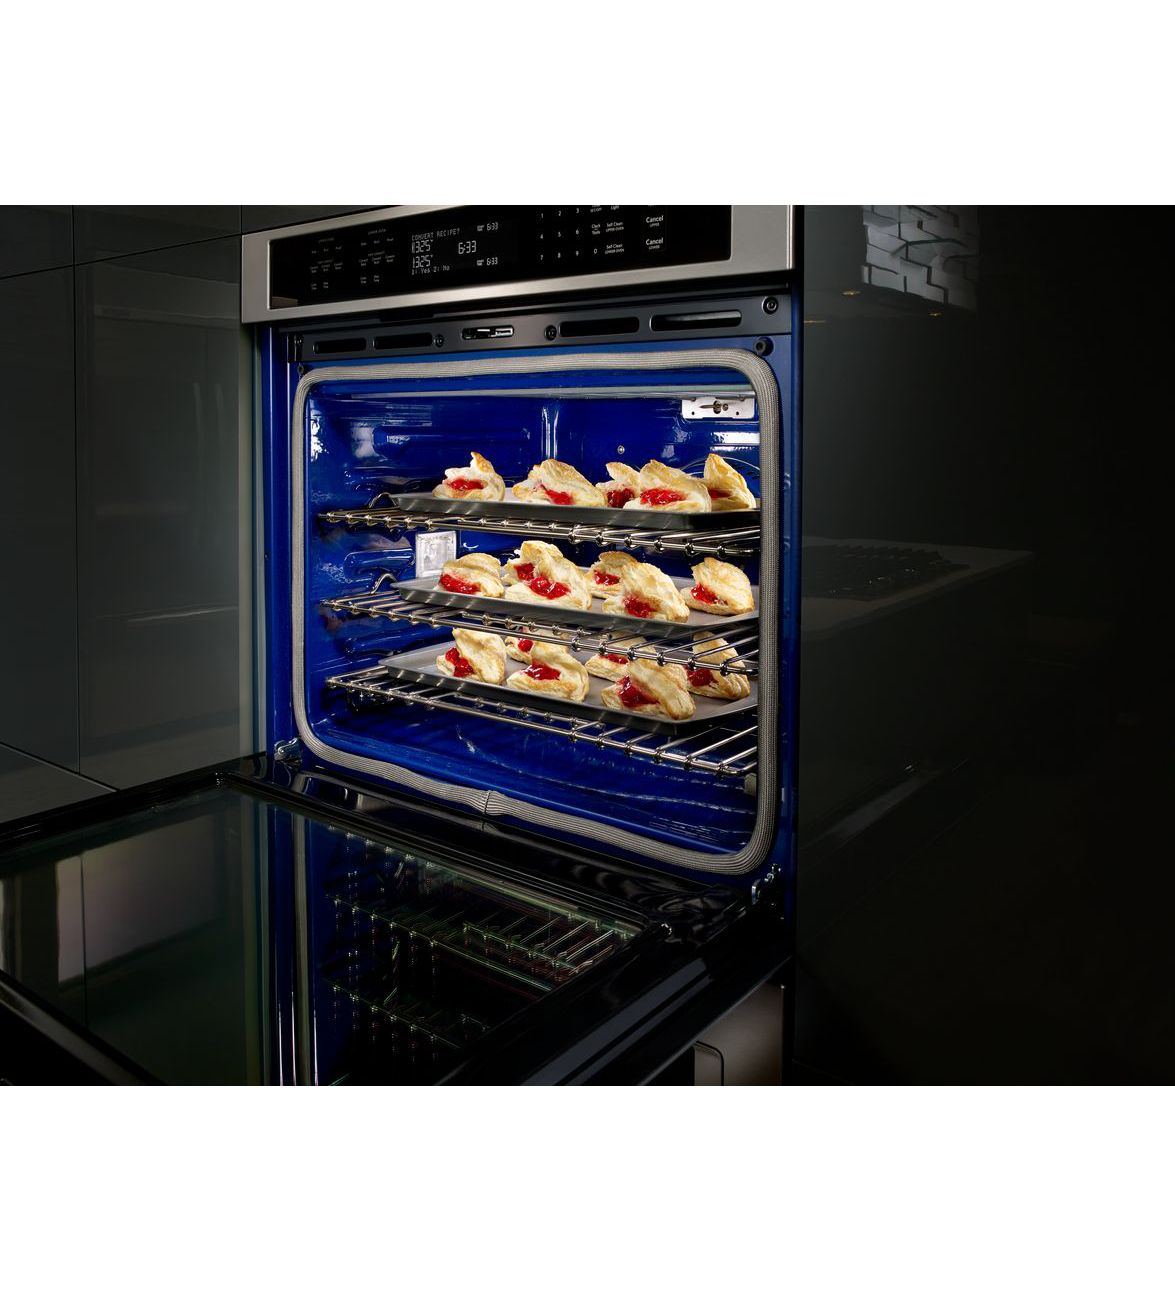 KODE500ESS by KitchenAid - 30 Double Wall Oven with Even-Heat